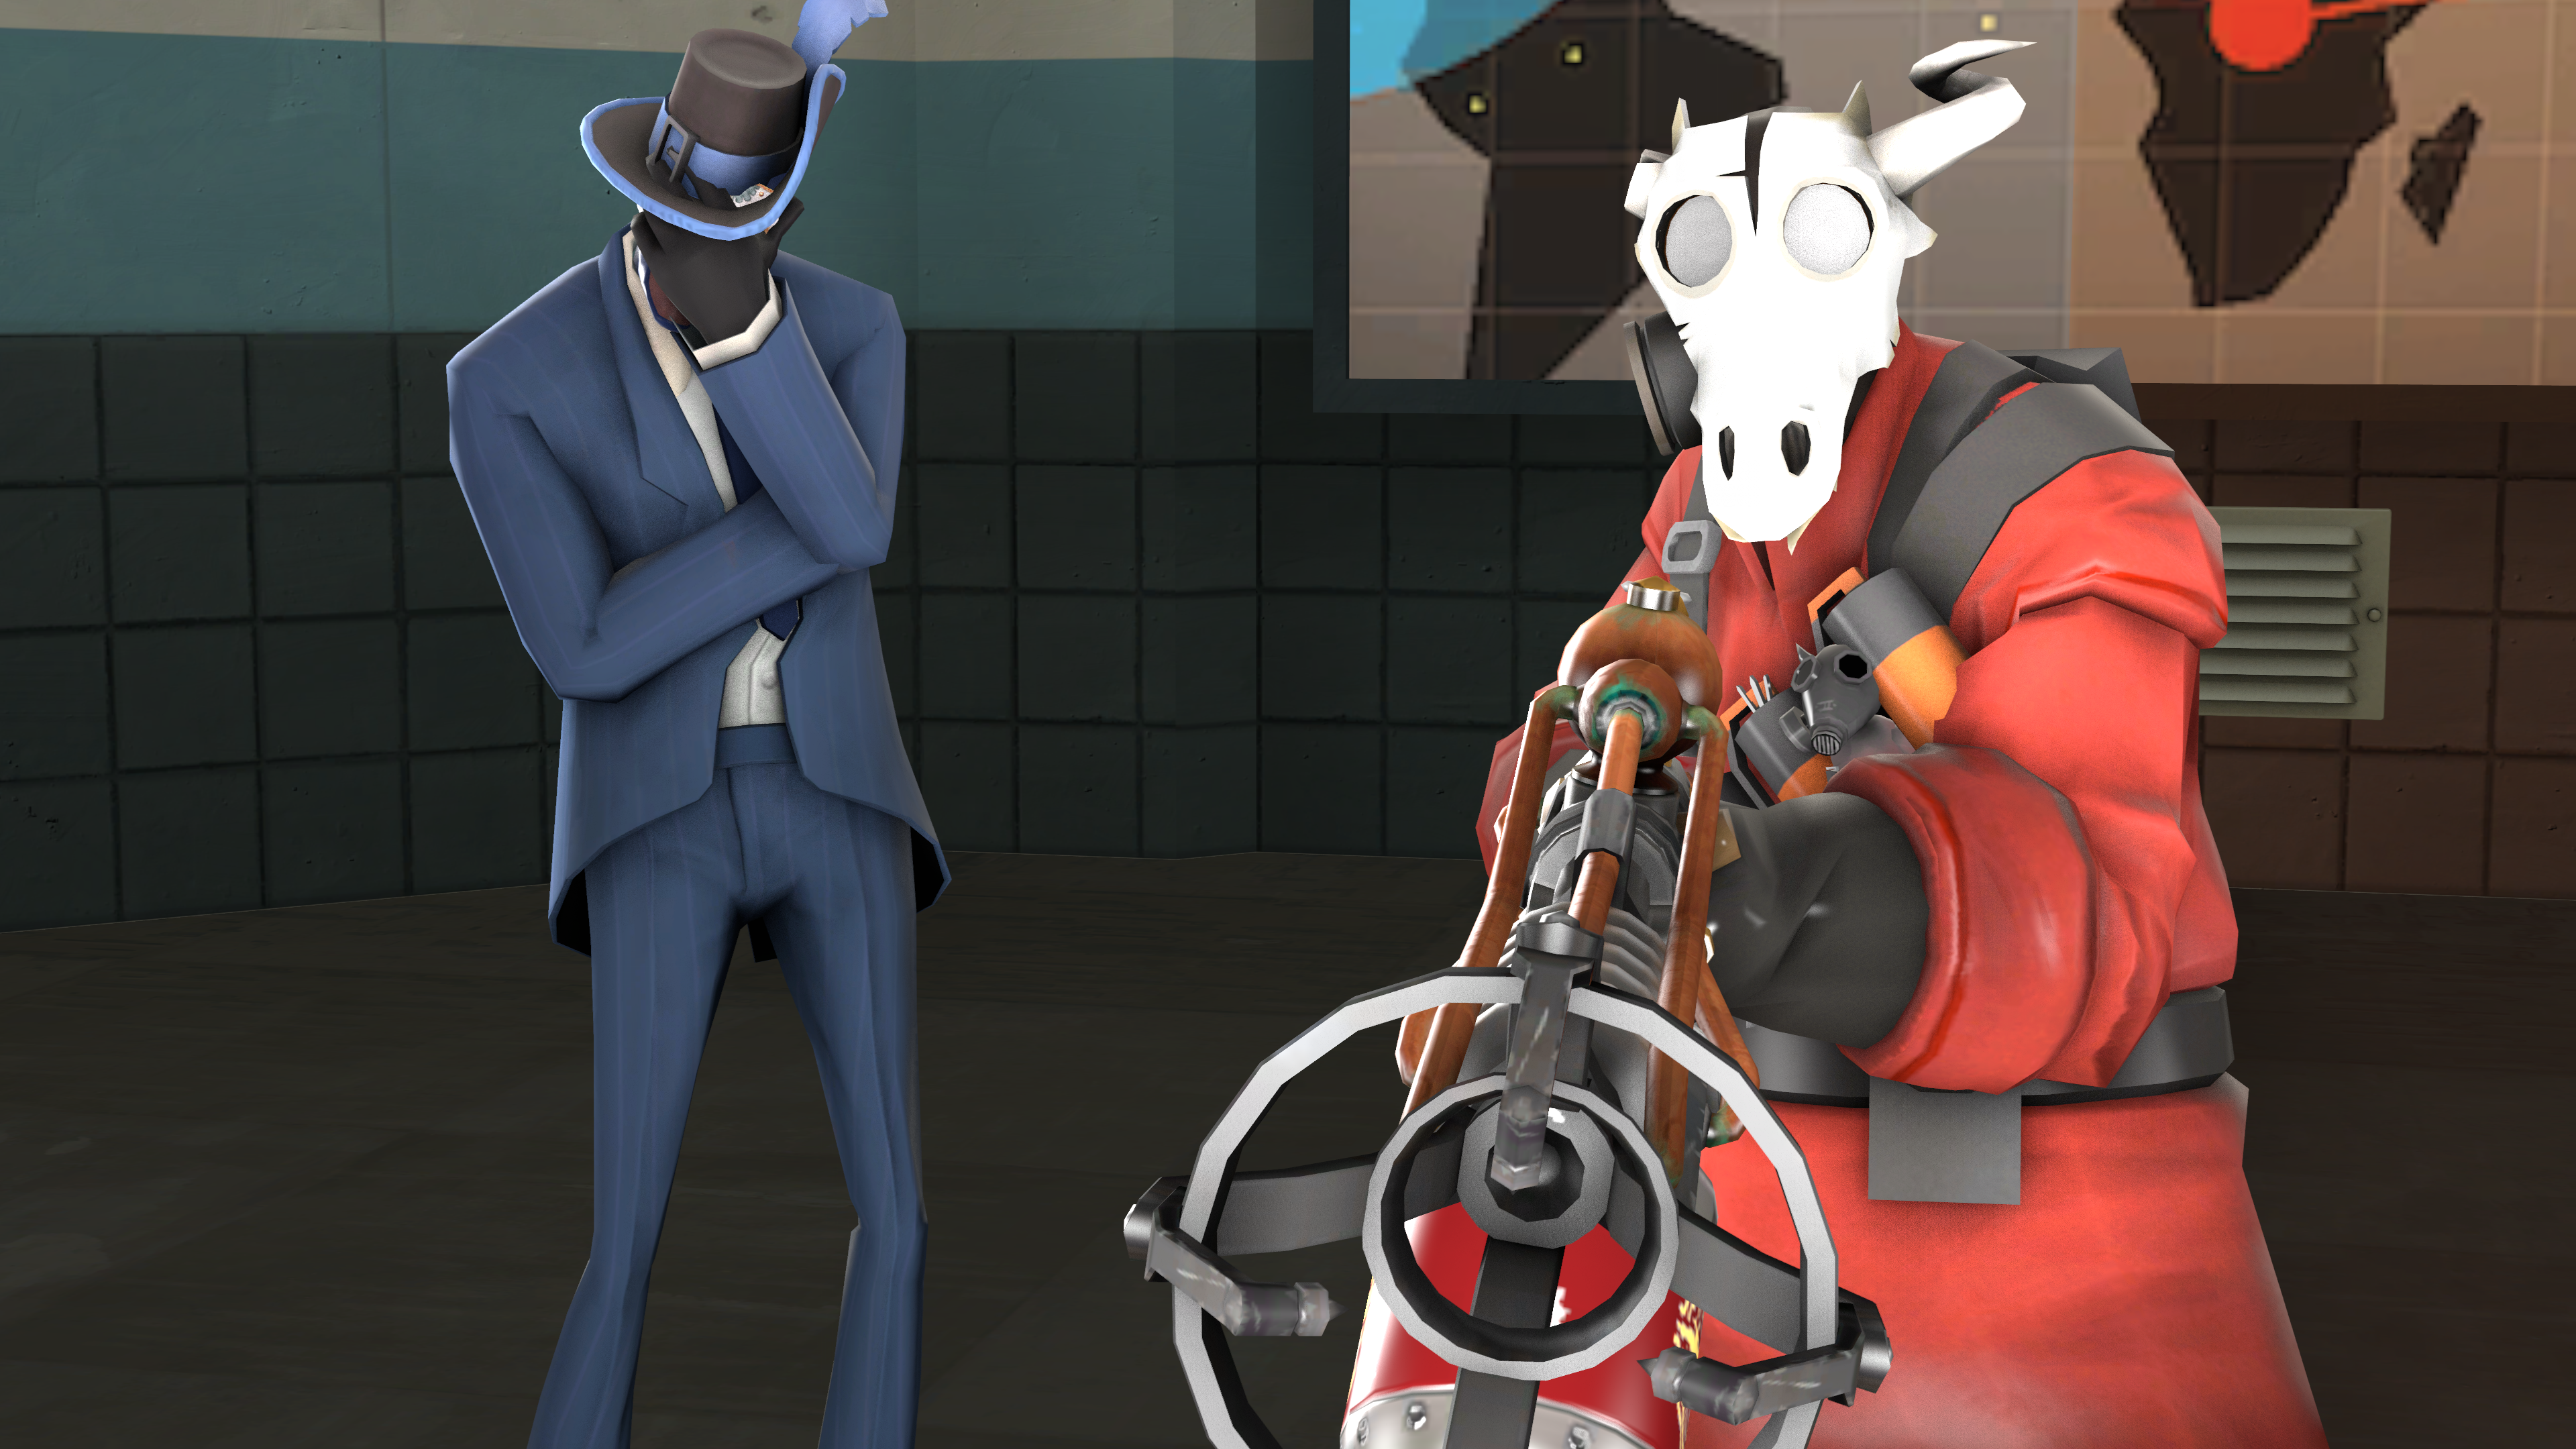 Team Fortress 2 Pyro Team Fortress Spy Team Fortress Video Game 3840x2160